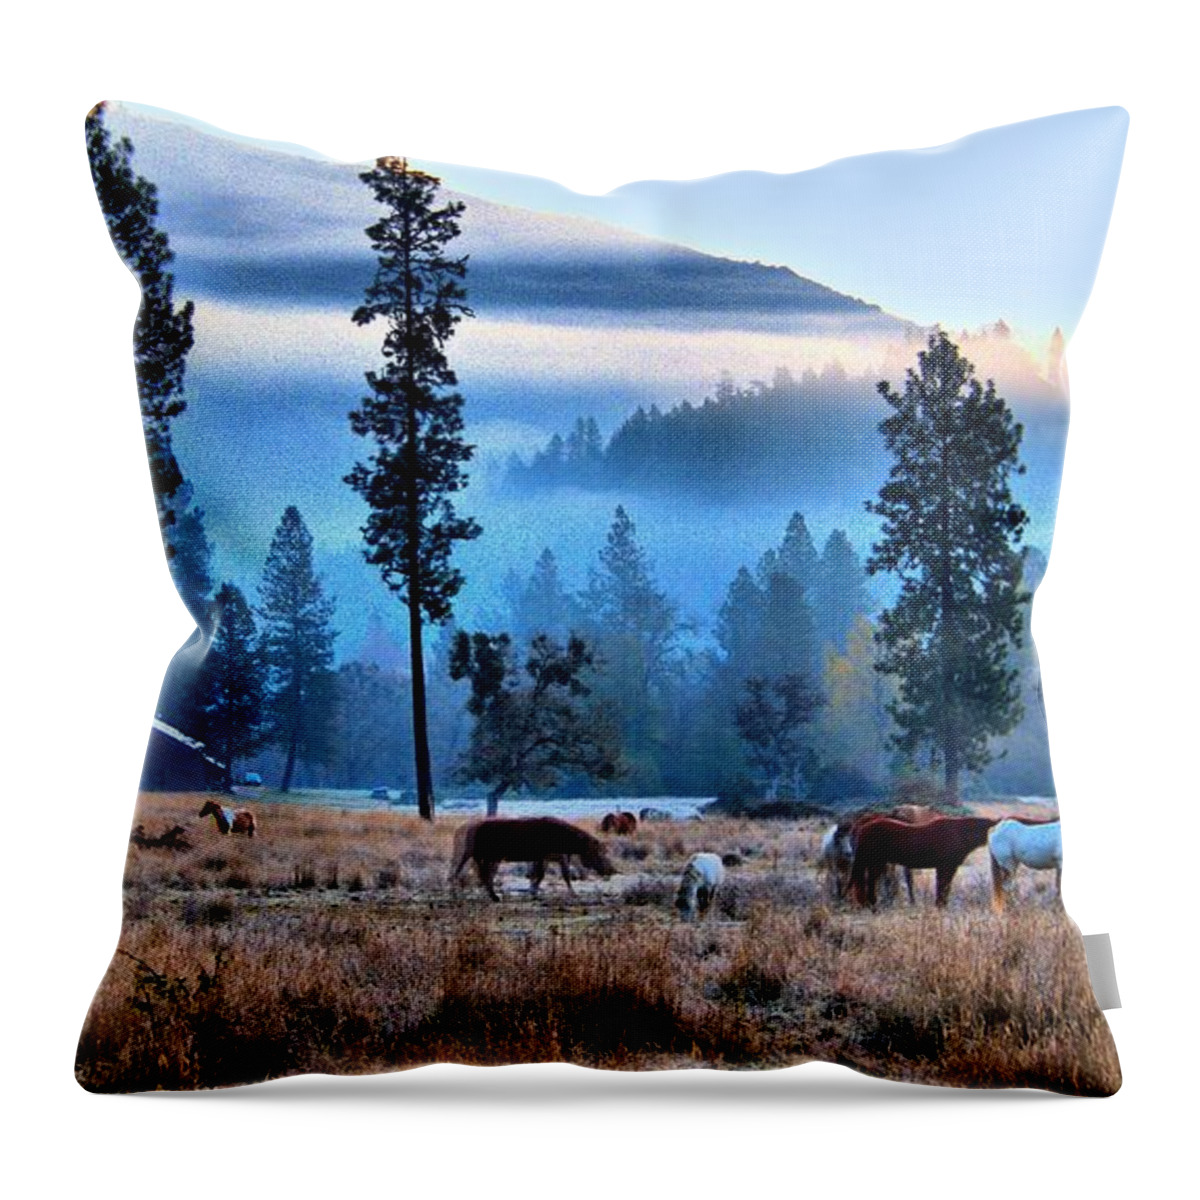 Landscape Throw Pillow featuring the photograph Sunrise On The Range by Julia Hassett